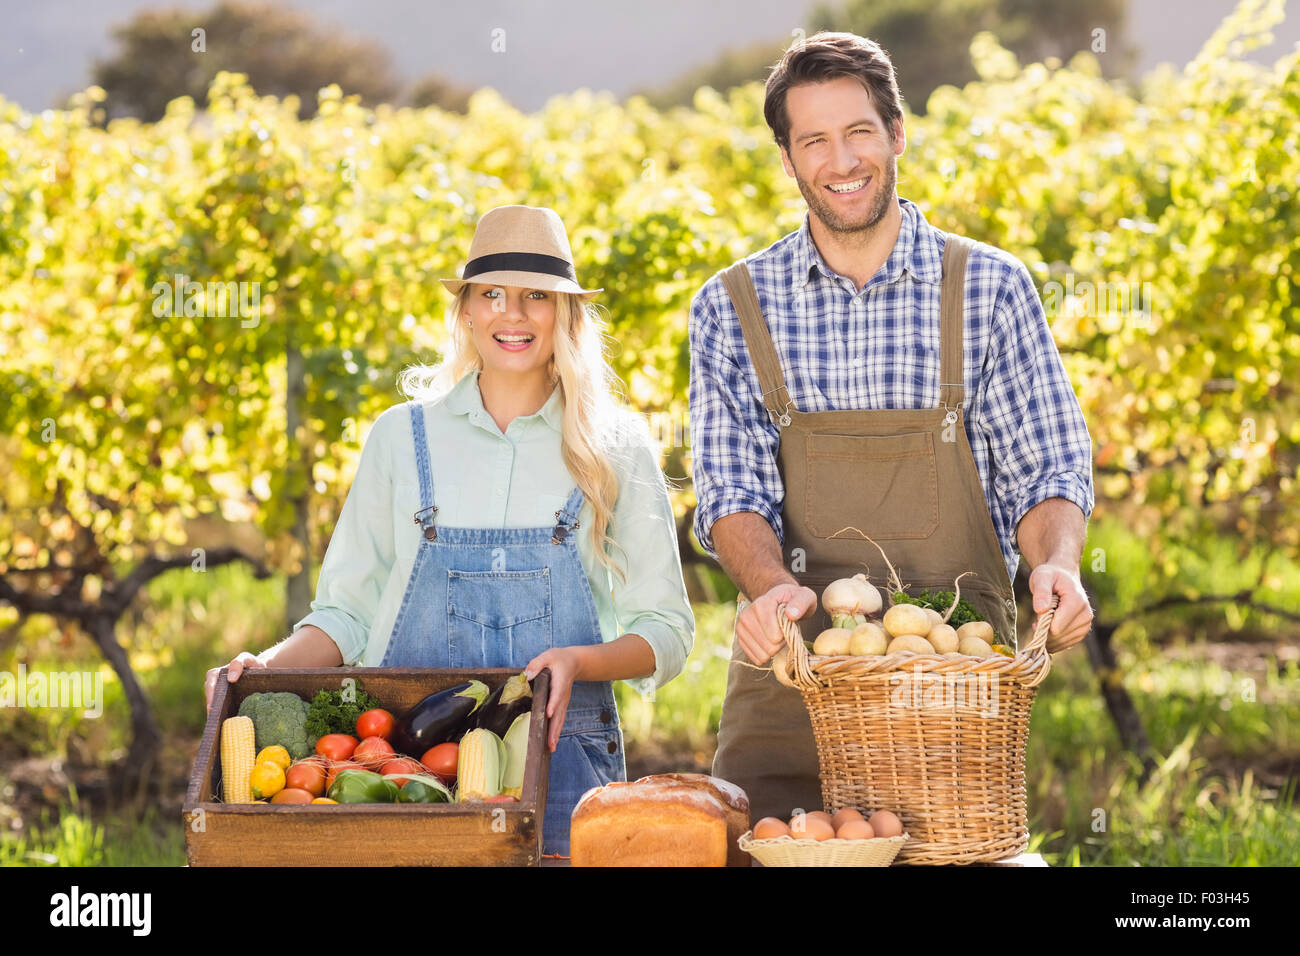 Happy farmer couple presenting their local food Stock Photo